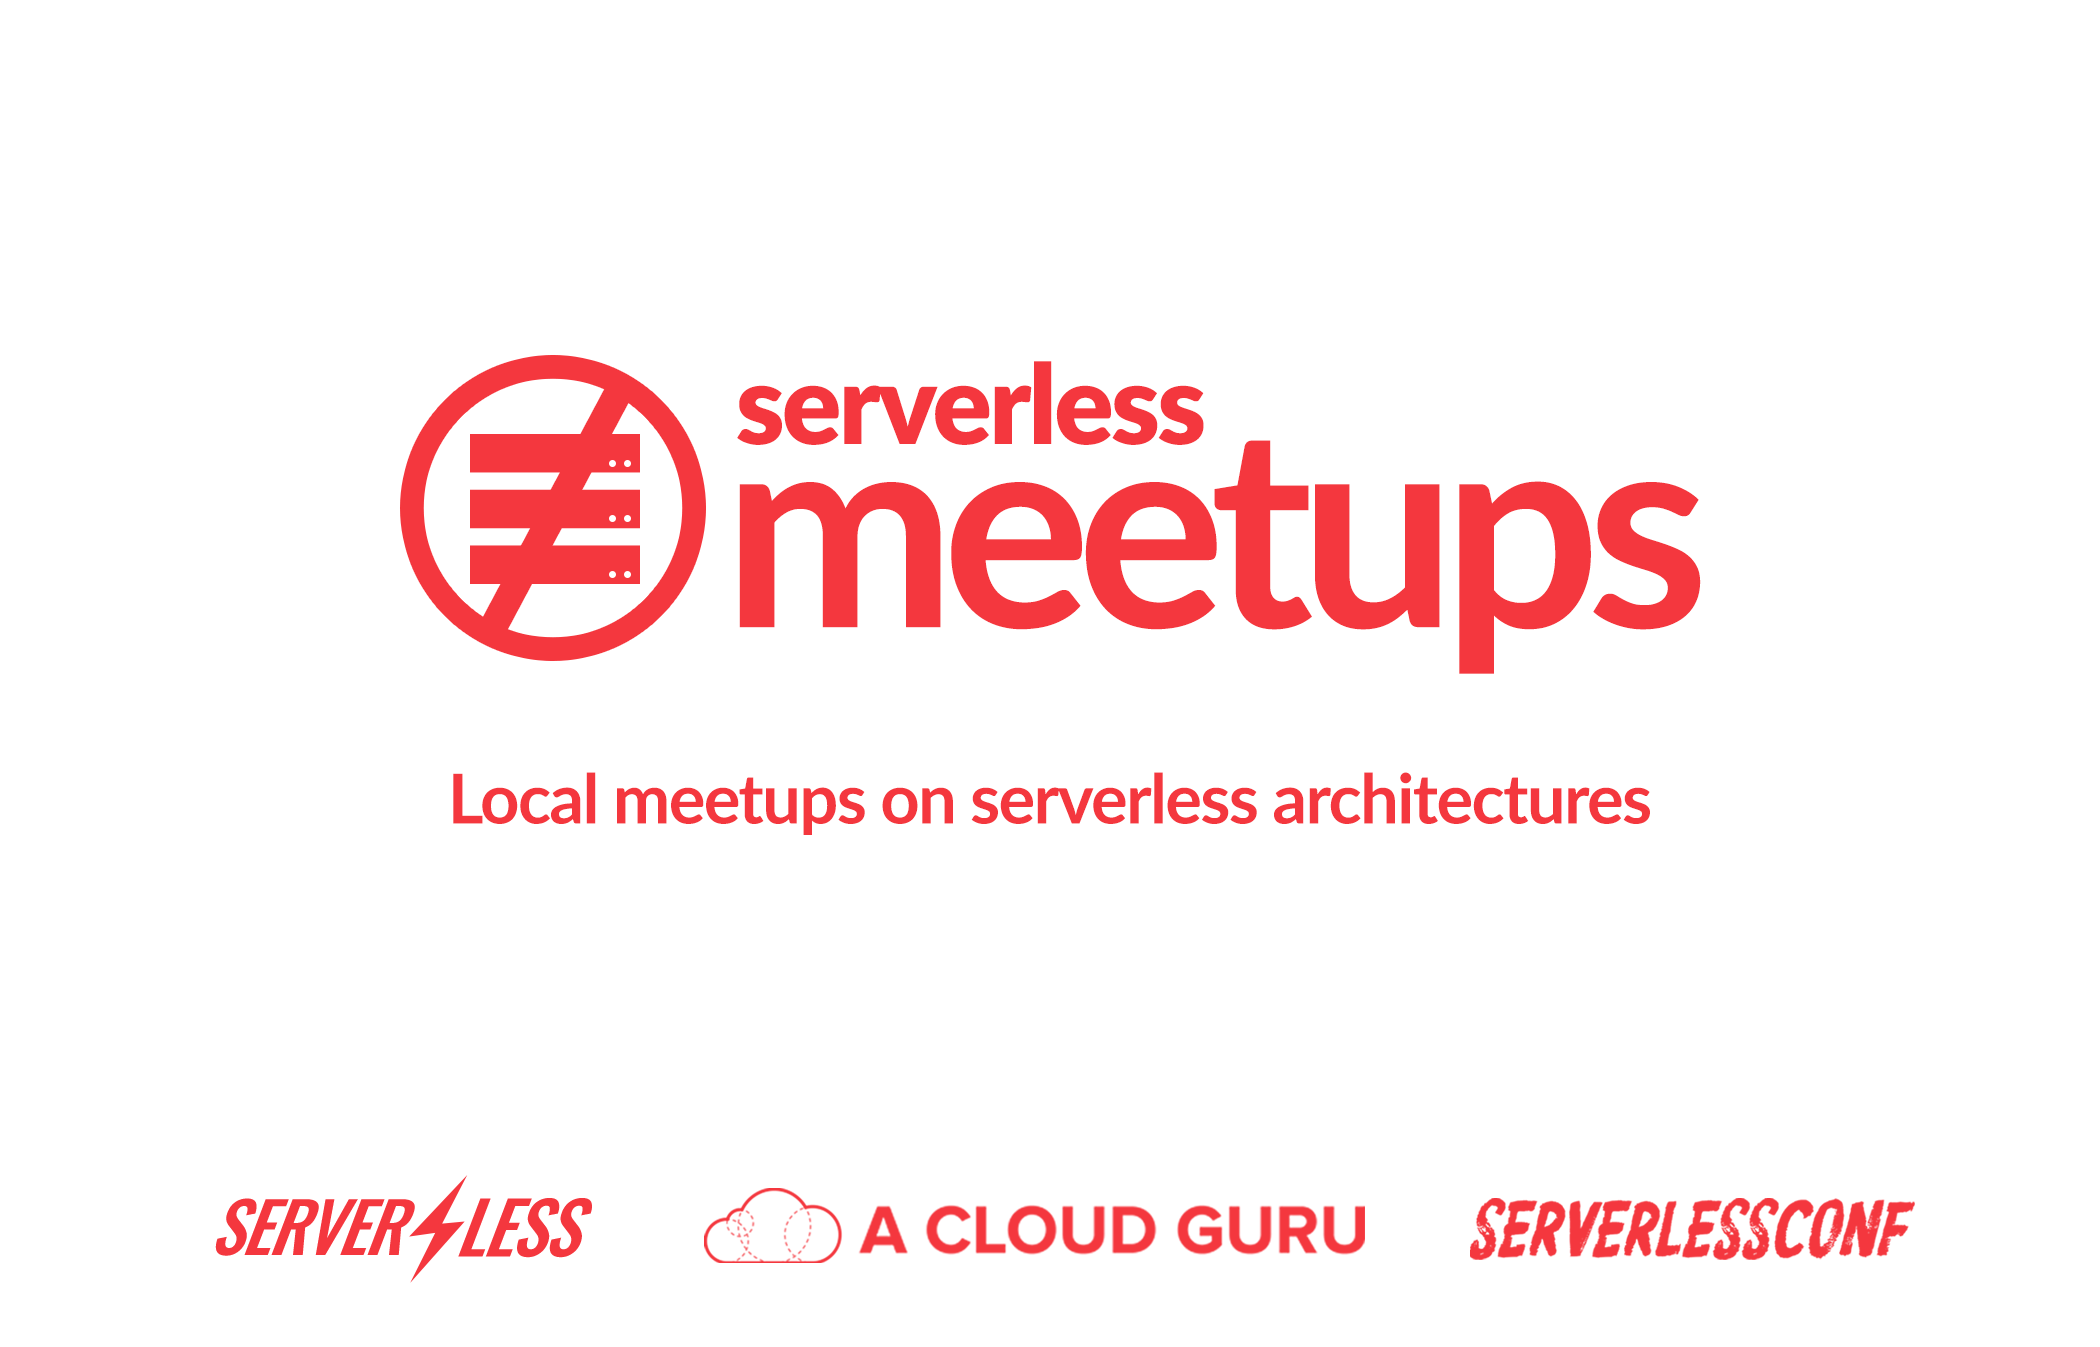 serverless meetups learn workshops architectures